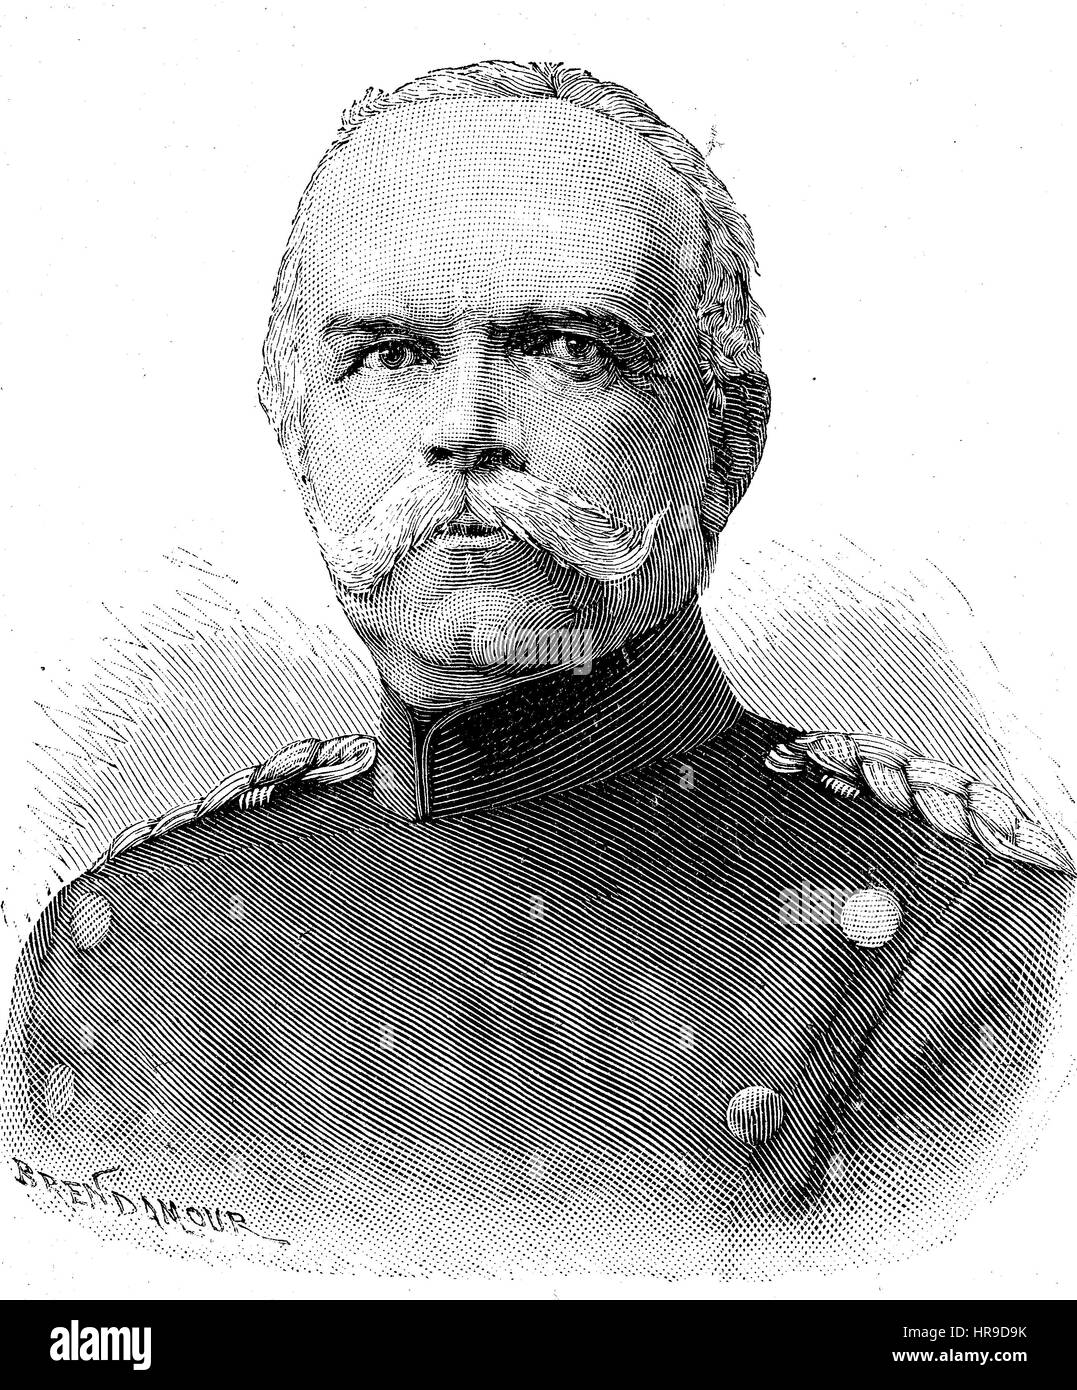 Georg Leo Graf von Caprivi de Caprera de Montecuccoli, Count George Leo of Caprivi, Caprera, and Montecuccoli, born Georg Leo von Caprivi, 1831 -1899, was a German general and statesman, Situation from the time of The Franco-Prussian War or Franco-German War,  Deutsch-Franzoesischer Krieg, 1870-1871, Reproduction of an original woodcut from the year 1885, digital improved Stock Photo